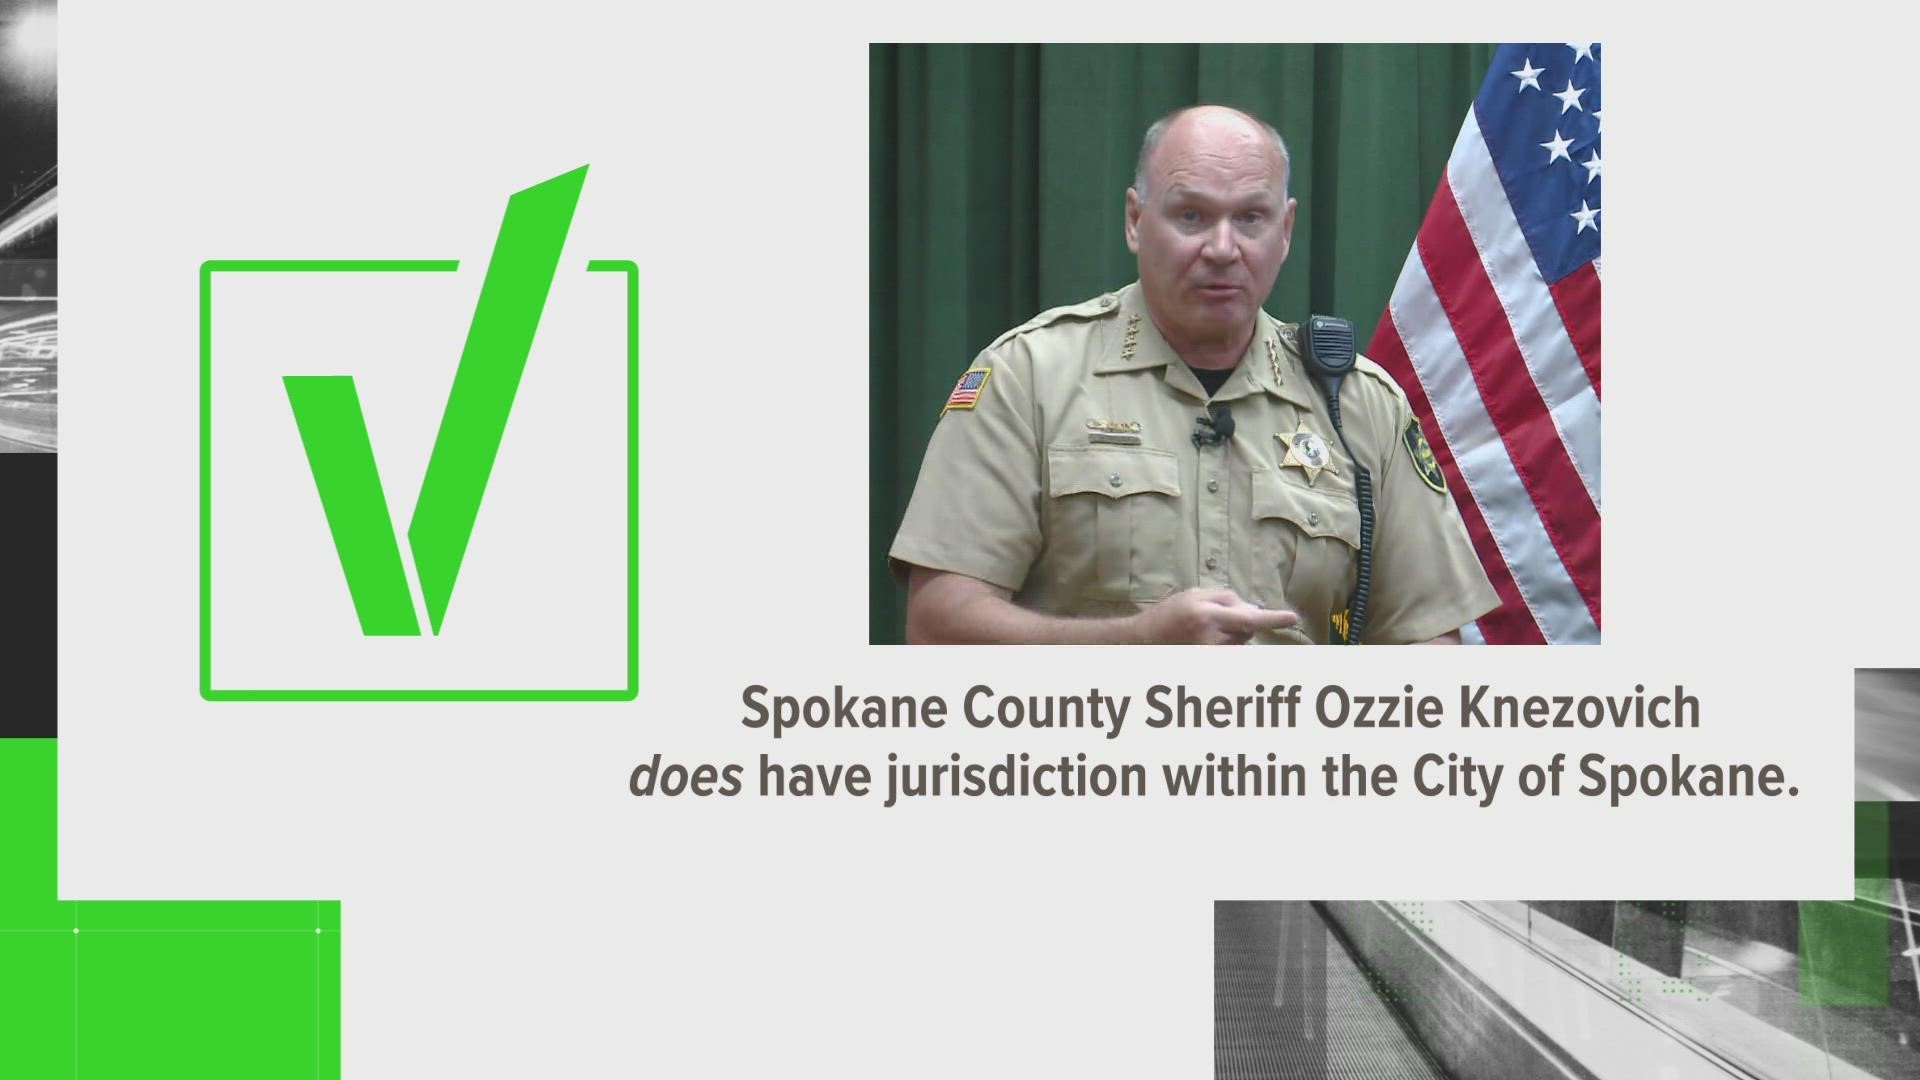 Sheriff Ozzie Knezovich wrote a letter to WSDOT stating he plans to clear out the homeless camp near I-90 by mid-October. State law says he has every right to do so.